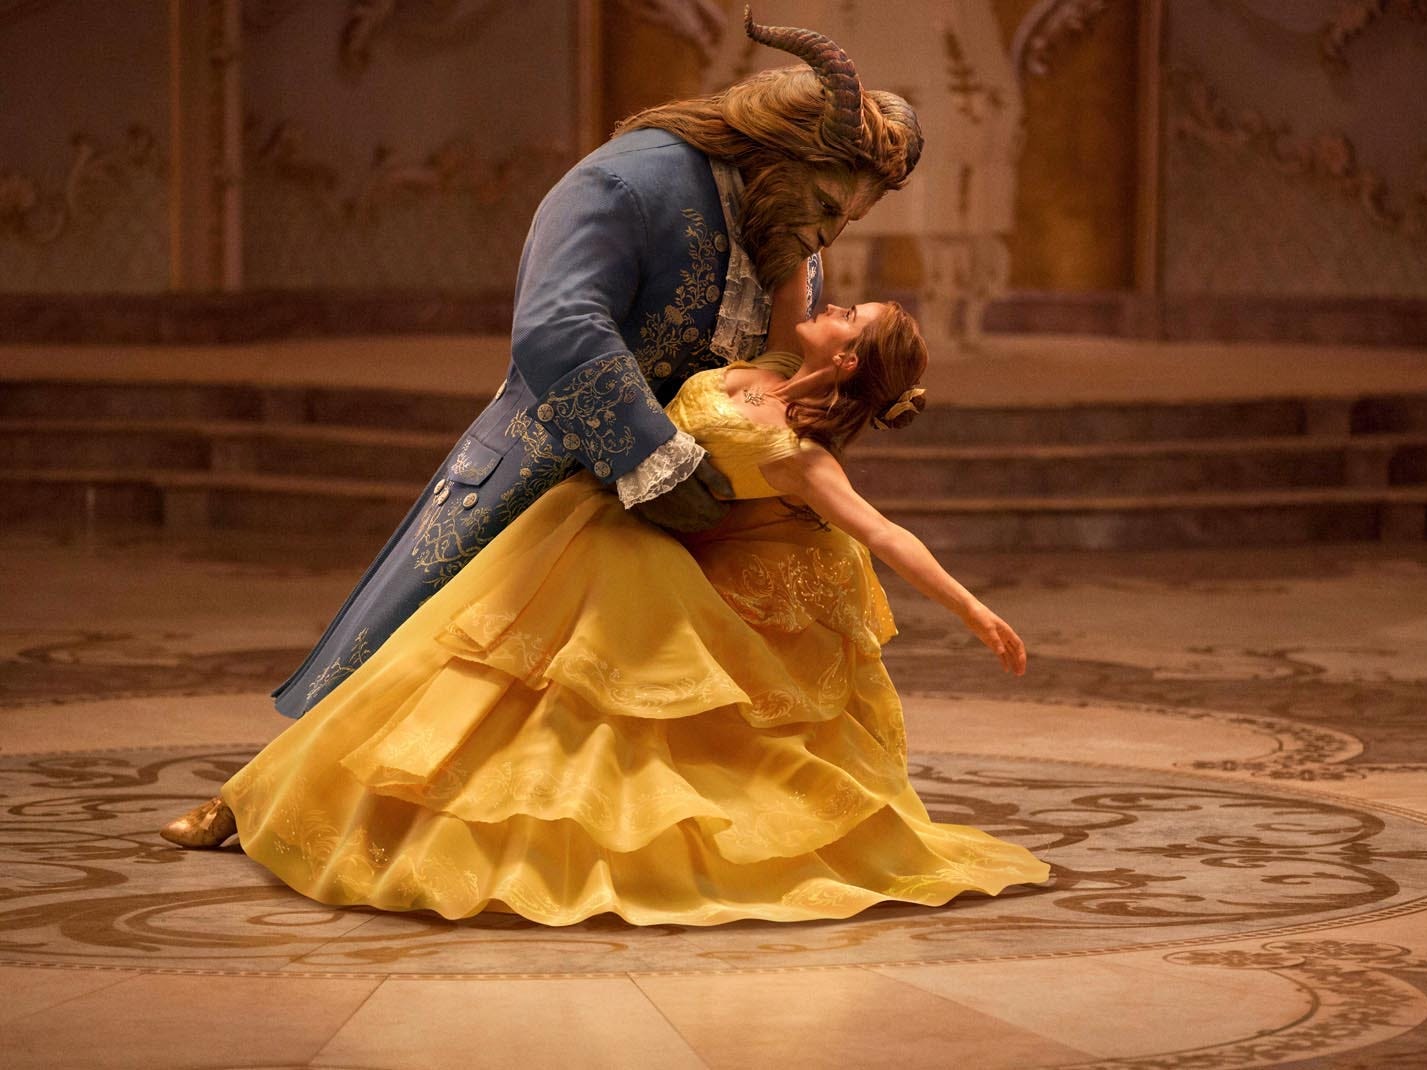 <p>"Beauty and the Beast," released in 2017, was the first of Disney's new wave of live-action remakes. As a result, it was graded on a curve at the time and made $1.2 billion, per Box Office Mojo.</p><p>But if you go back and watch this movie seven years later, you might notice something: <a href="https://www.businessinsider.com/emma-watsons-movies-ranked-from-worst-to-best">Emma Watson</a>, for all her charm, is simply not a great singer. And Paige O'Hara, who voiced Belle in the 1991 original, has one of the clearest voices in all of Disney's history.</p><p>There are a few other issues with this movie — it's <em>so </em>long, adds unneeded backstory, switches the amazing Beast song from the Broadway adaptation ("I Can't Love Her") in favor of the boring "Evermore," the underwhelming "<a href="https://www.businessinsider.com/beauty-and-the-beast-josh-gad-regrets-gay-moment-2022-3">exclusively gay moment</a>" — but our biggest problem is Belle.</p>